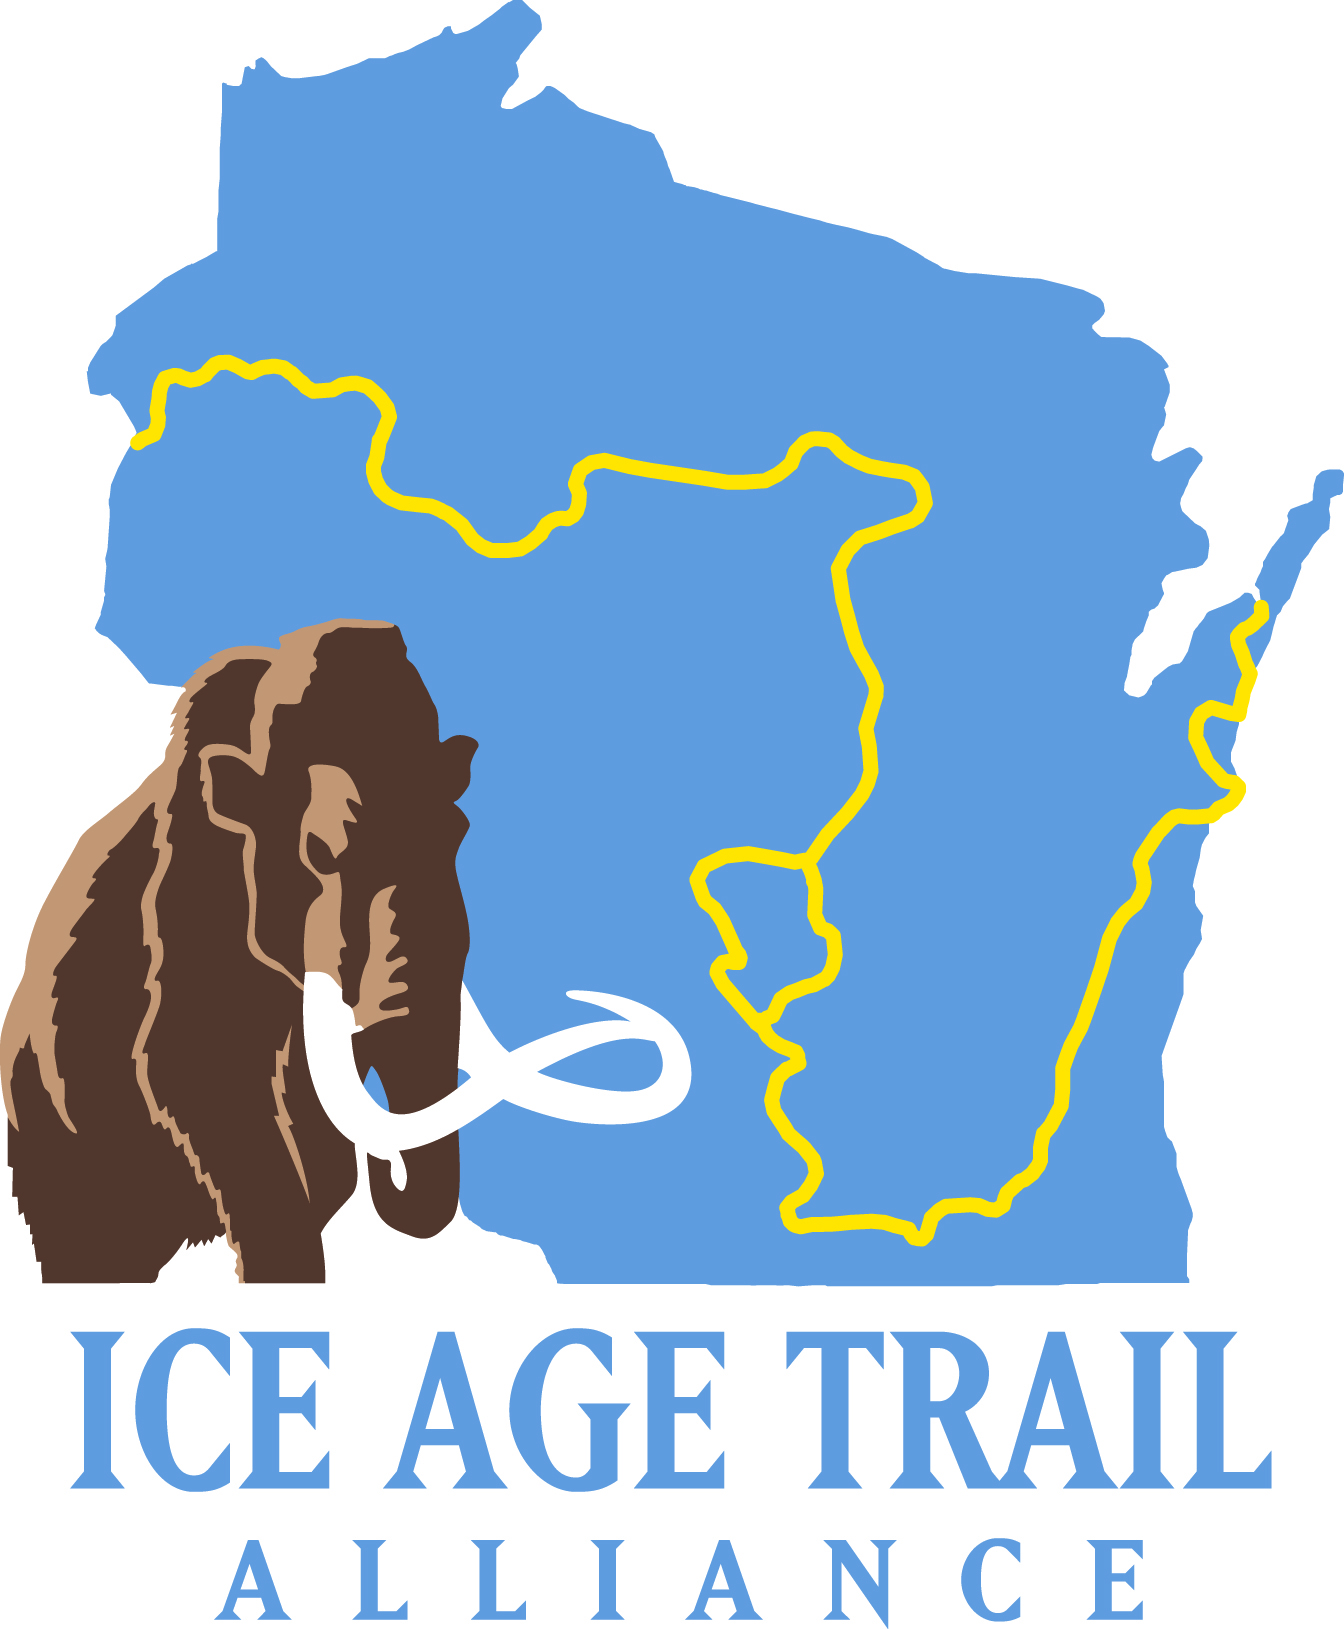 Ice Age Trail Alliance Logo, with woolly mammoth over outline of Wisconsin showing the route of the Ice Age Trail. 